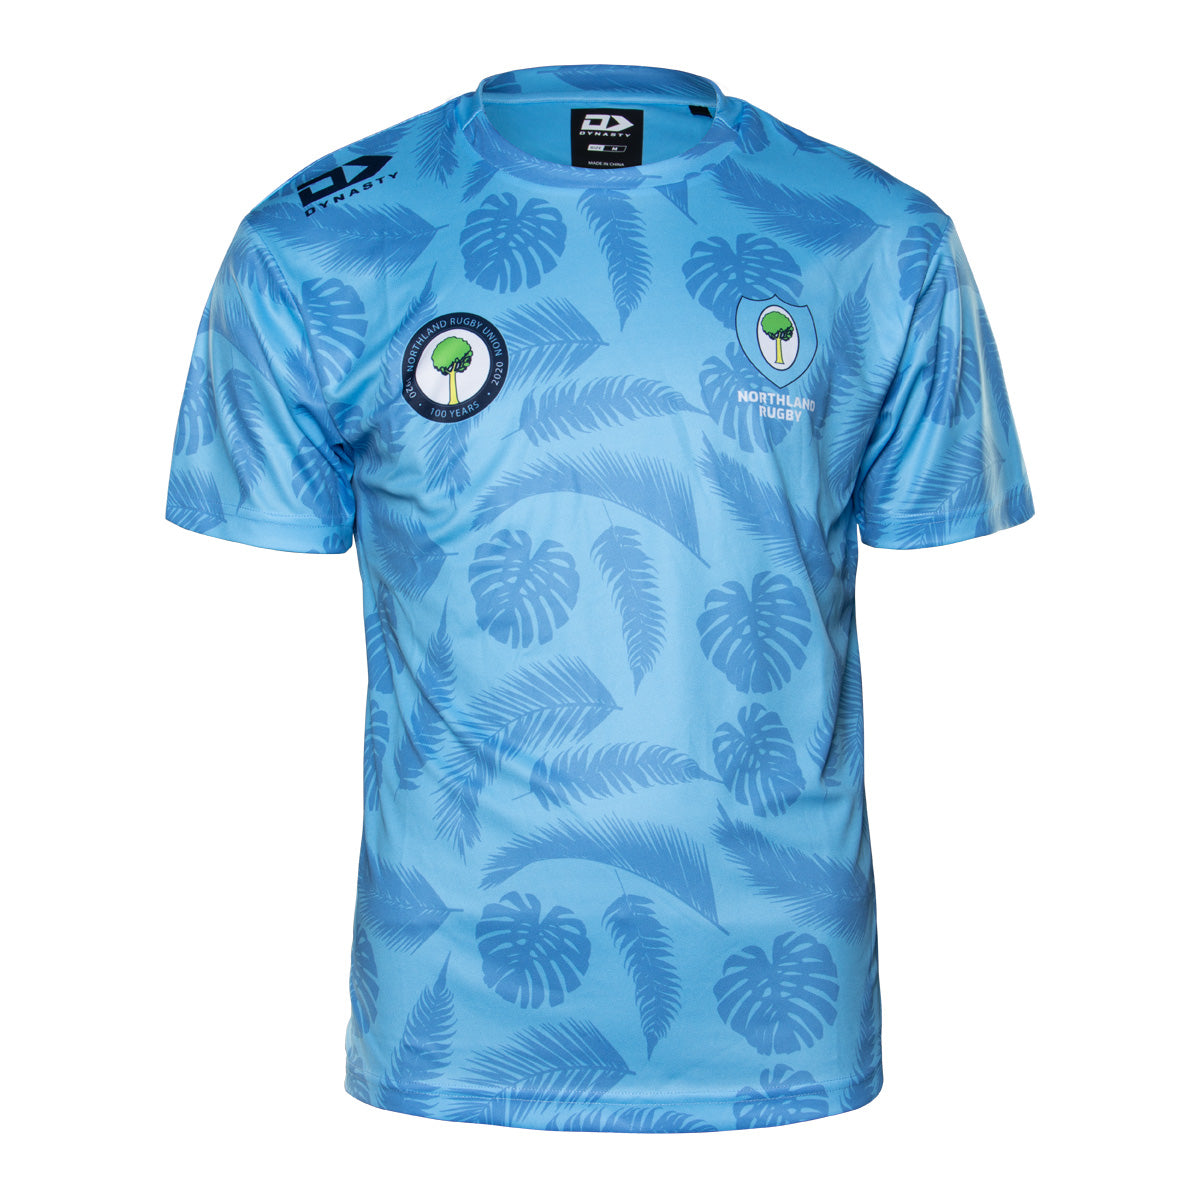 2021 Northland Rugby Mens Centenary Tee